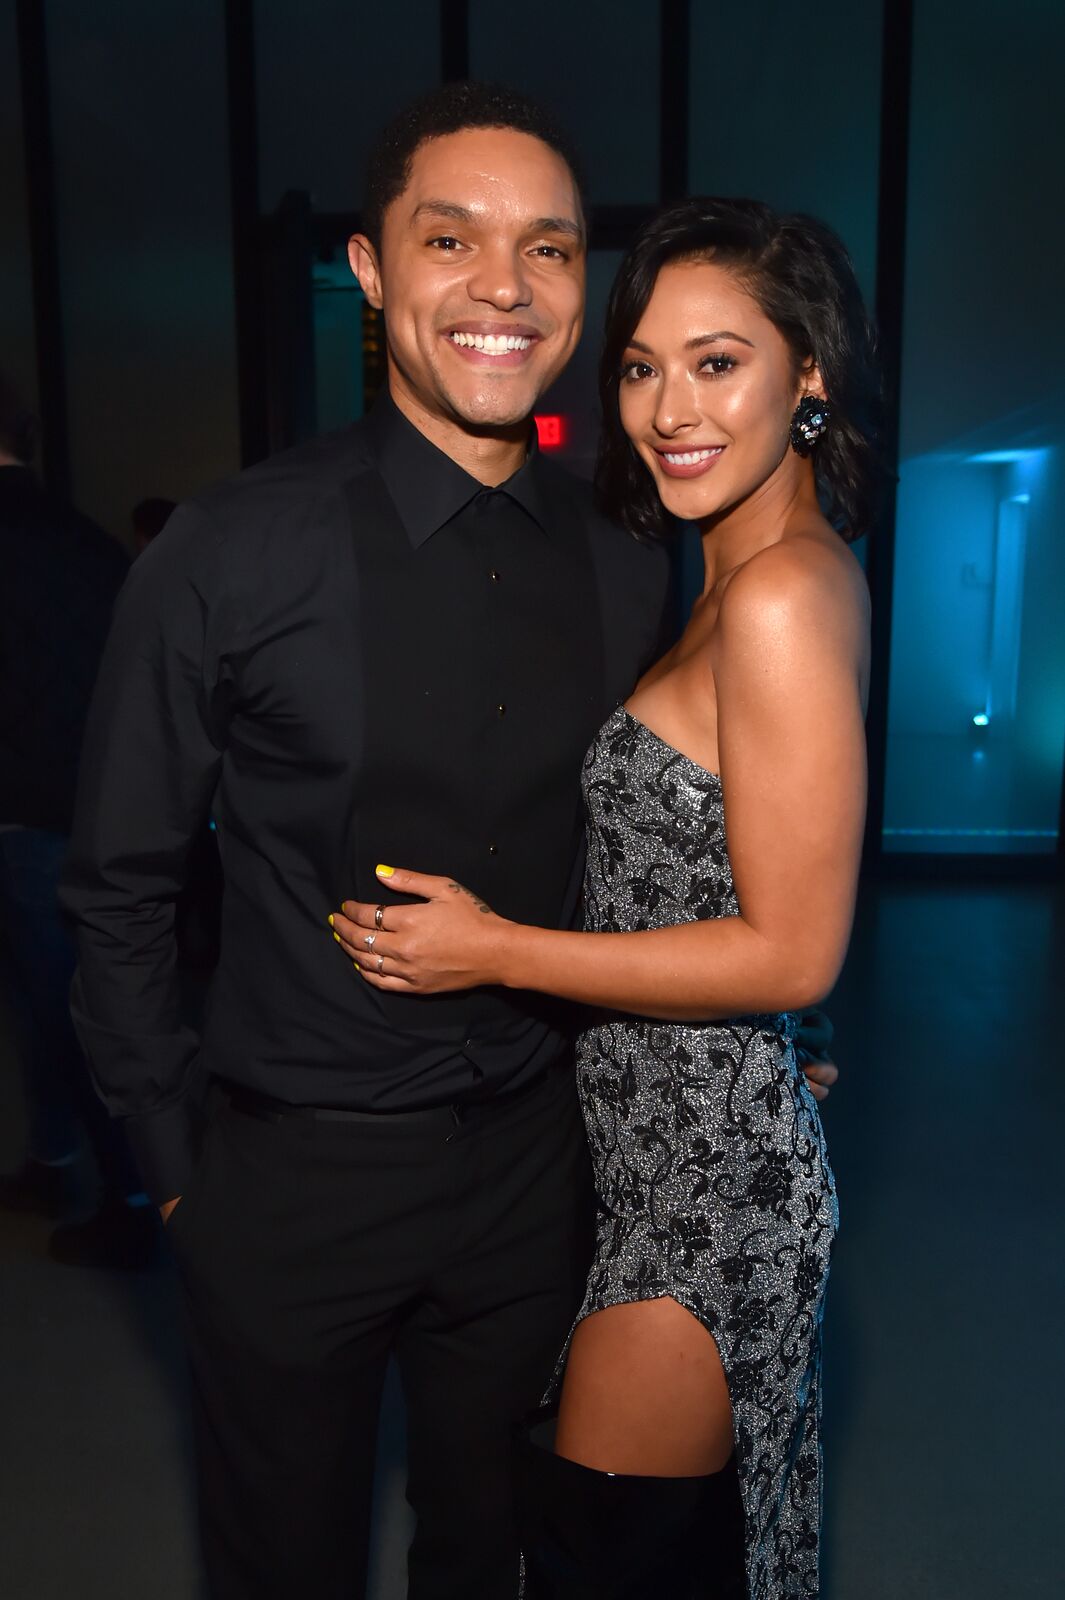 Trevor Noah and Jordyn Taylor at the Universal Music Group's 2018 After Party to celebrate the Grammy Awards in New York | Source: Getty Images